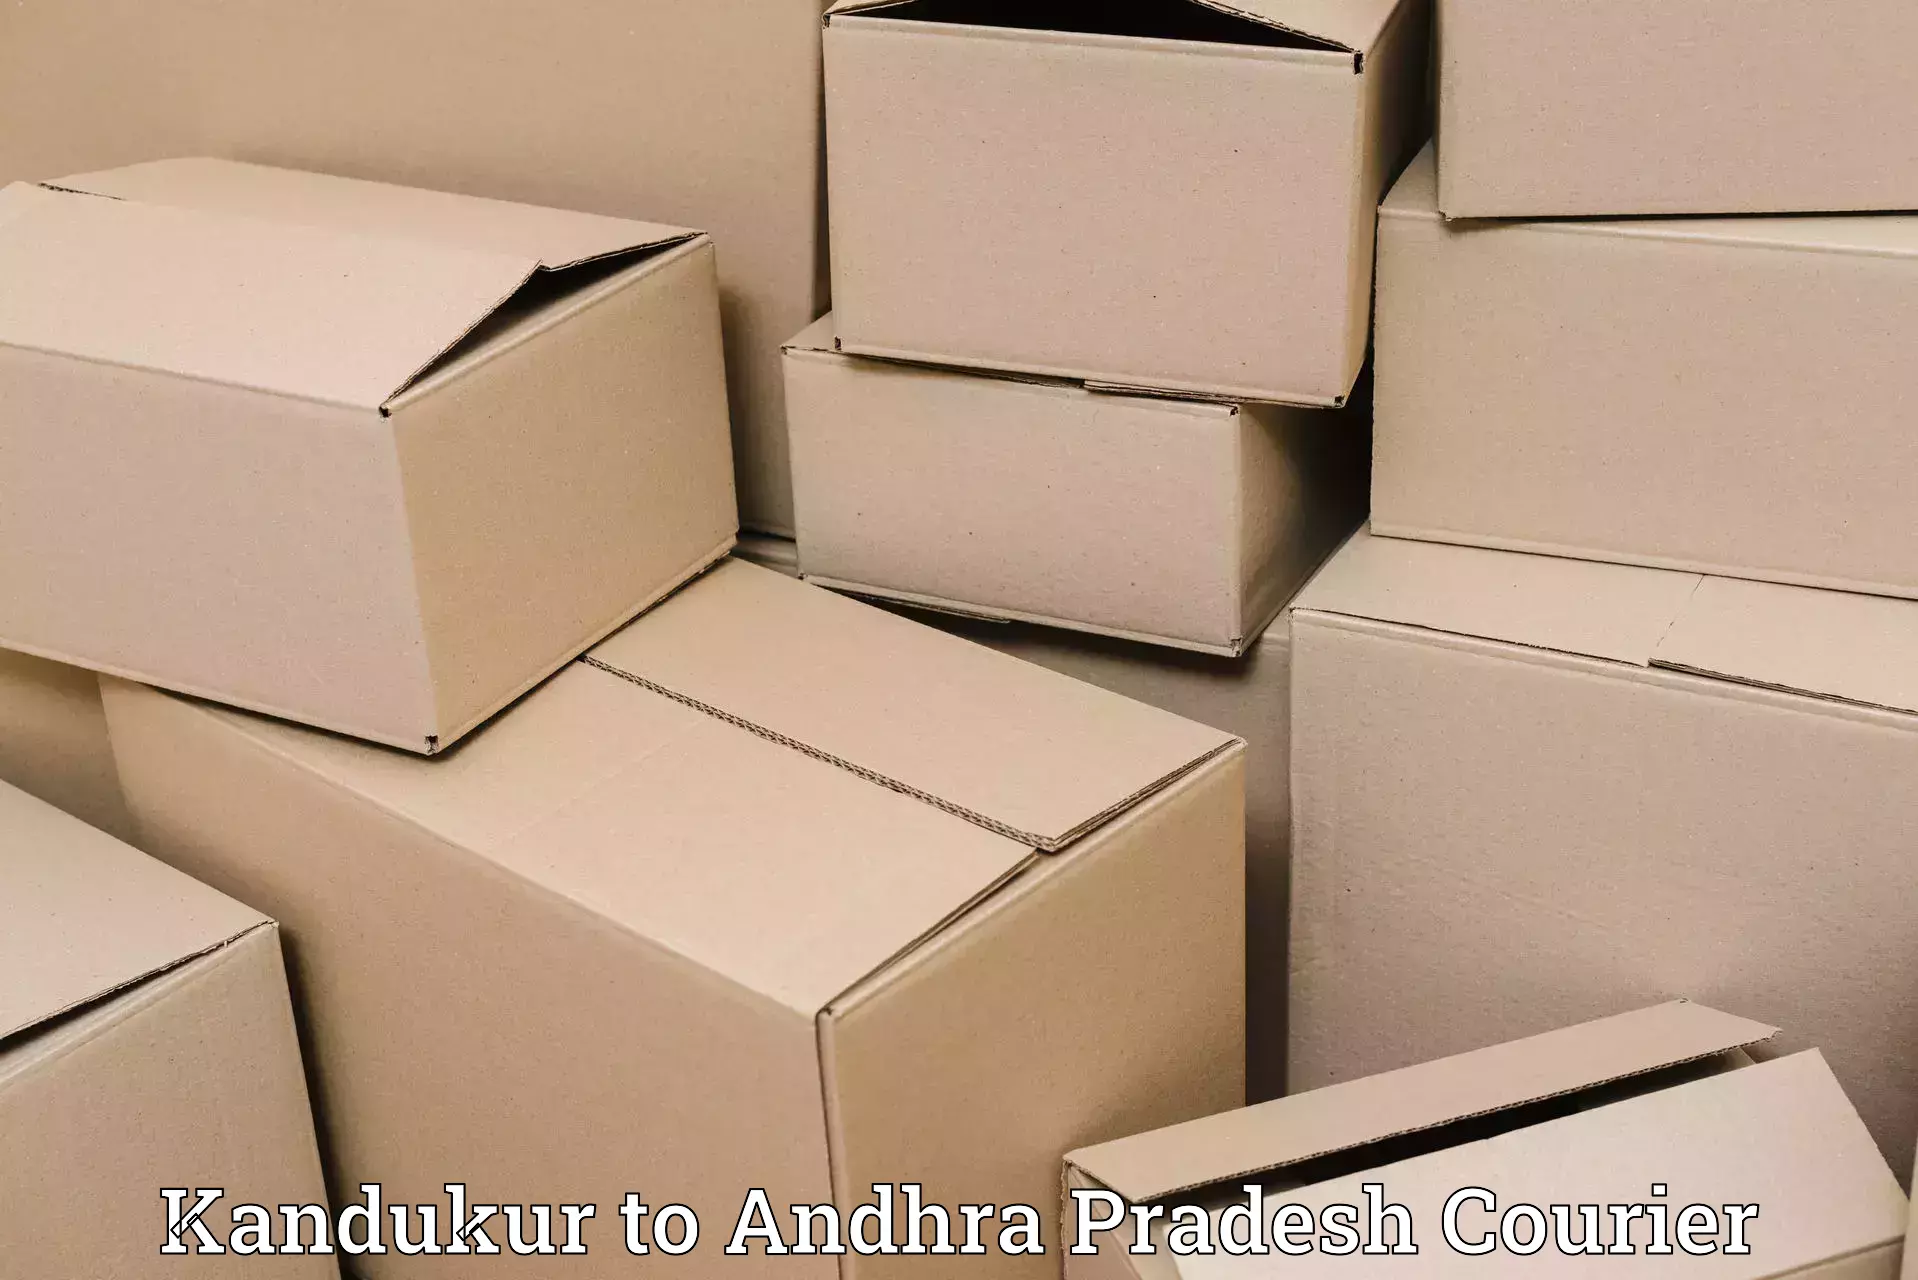 Specialized courier services Kandukur to Sattenapalle